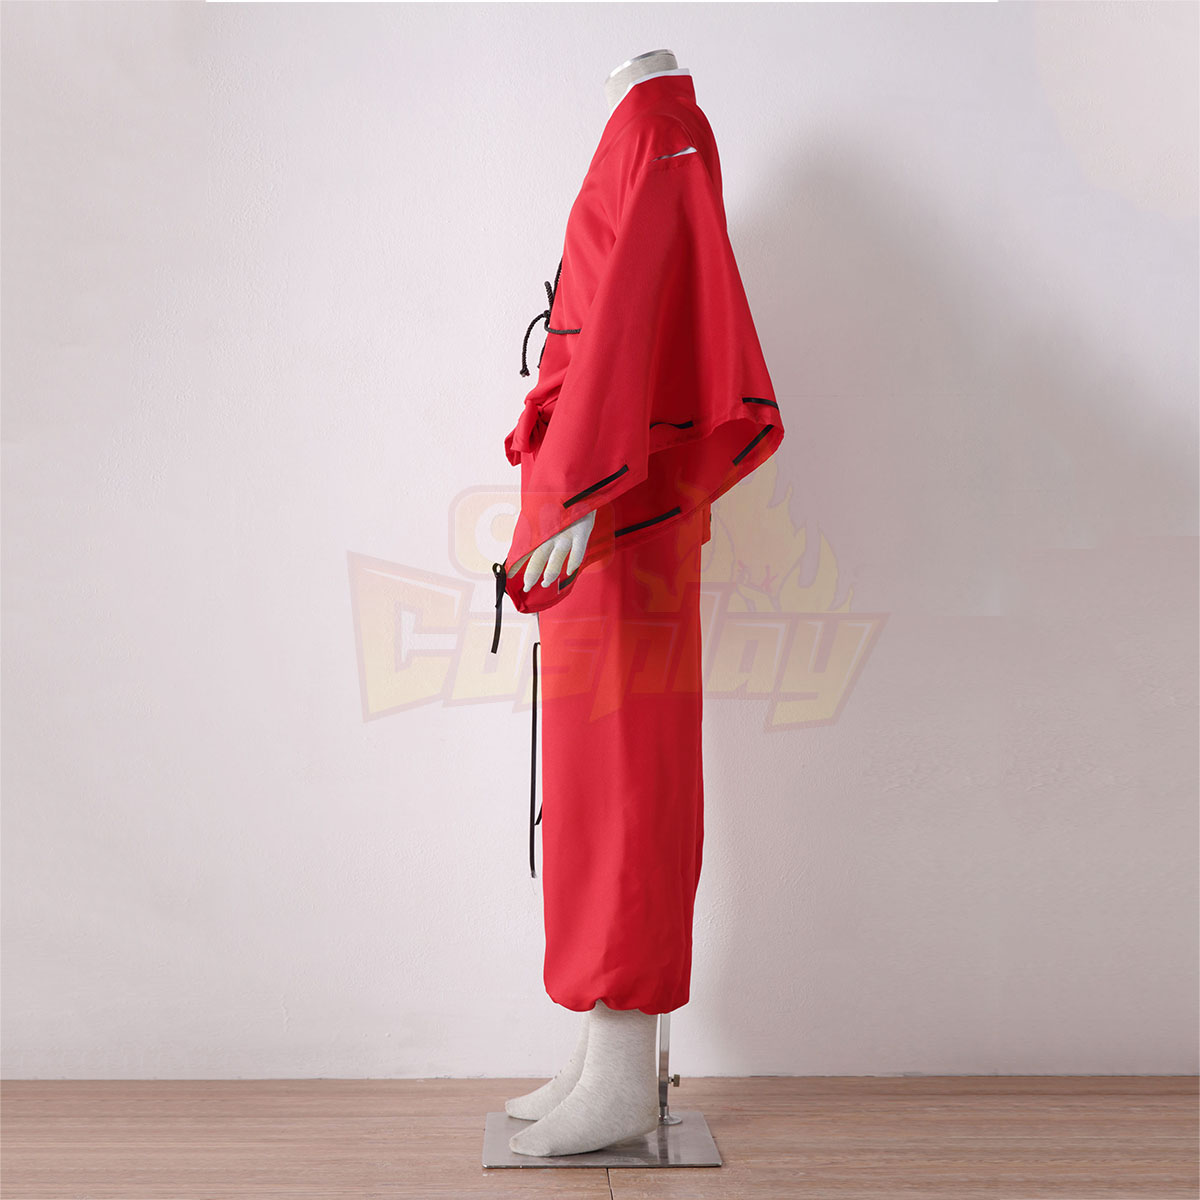 Inuyasha 2ND Red Cosplay Costumes Deluxe Edition